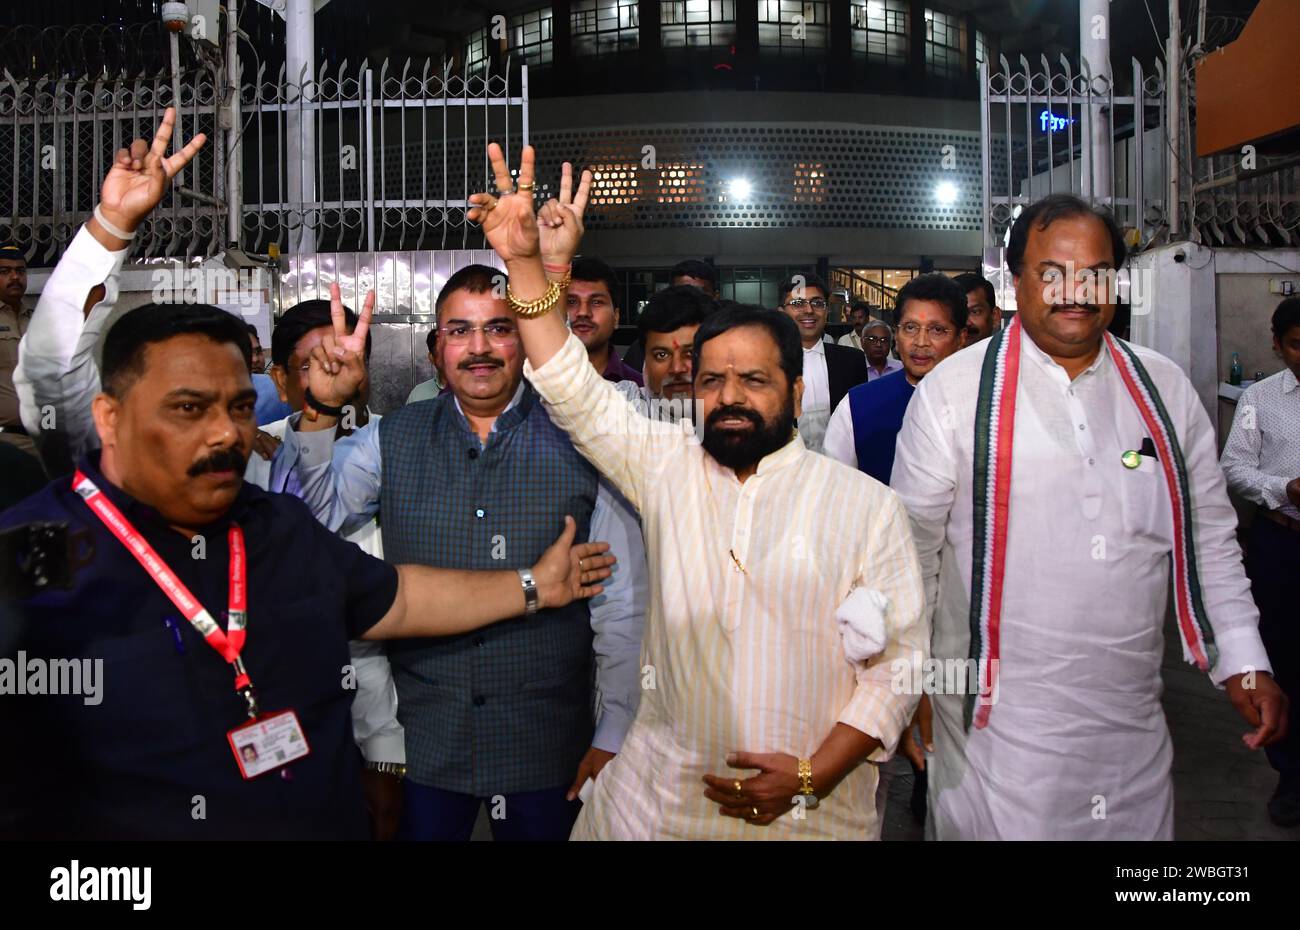 MUMBAI, INDIA - JANUARY 10: Shiv Sena (Shinde faction) MLAs celebrate after the verdict in the MLA disqualification case came in their favour, at Vidhan Bhavan on January 10, 2024 in Mumbai, India. The Maharashtra Legislative Assembly Speaker Rahul Narwekar today held that Eknath Shinde led faction was the real Shiv Sena when the rival faction emerged within the party on June 22, 2022. He has refused to disqualify any member from both the factions, led by Shinde and Uddhav Thackeray. Both the factions had filed 34 petitions against each other before the speaker in 2022, seeking the disqualifi Stock Photo